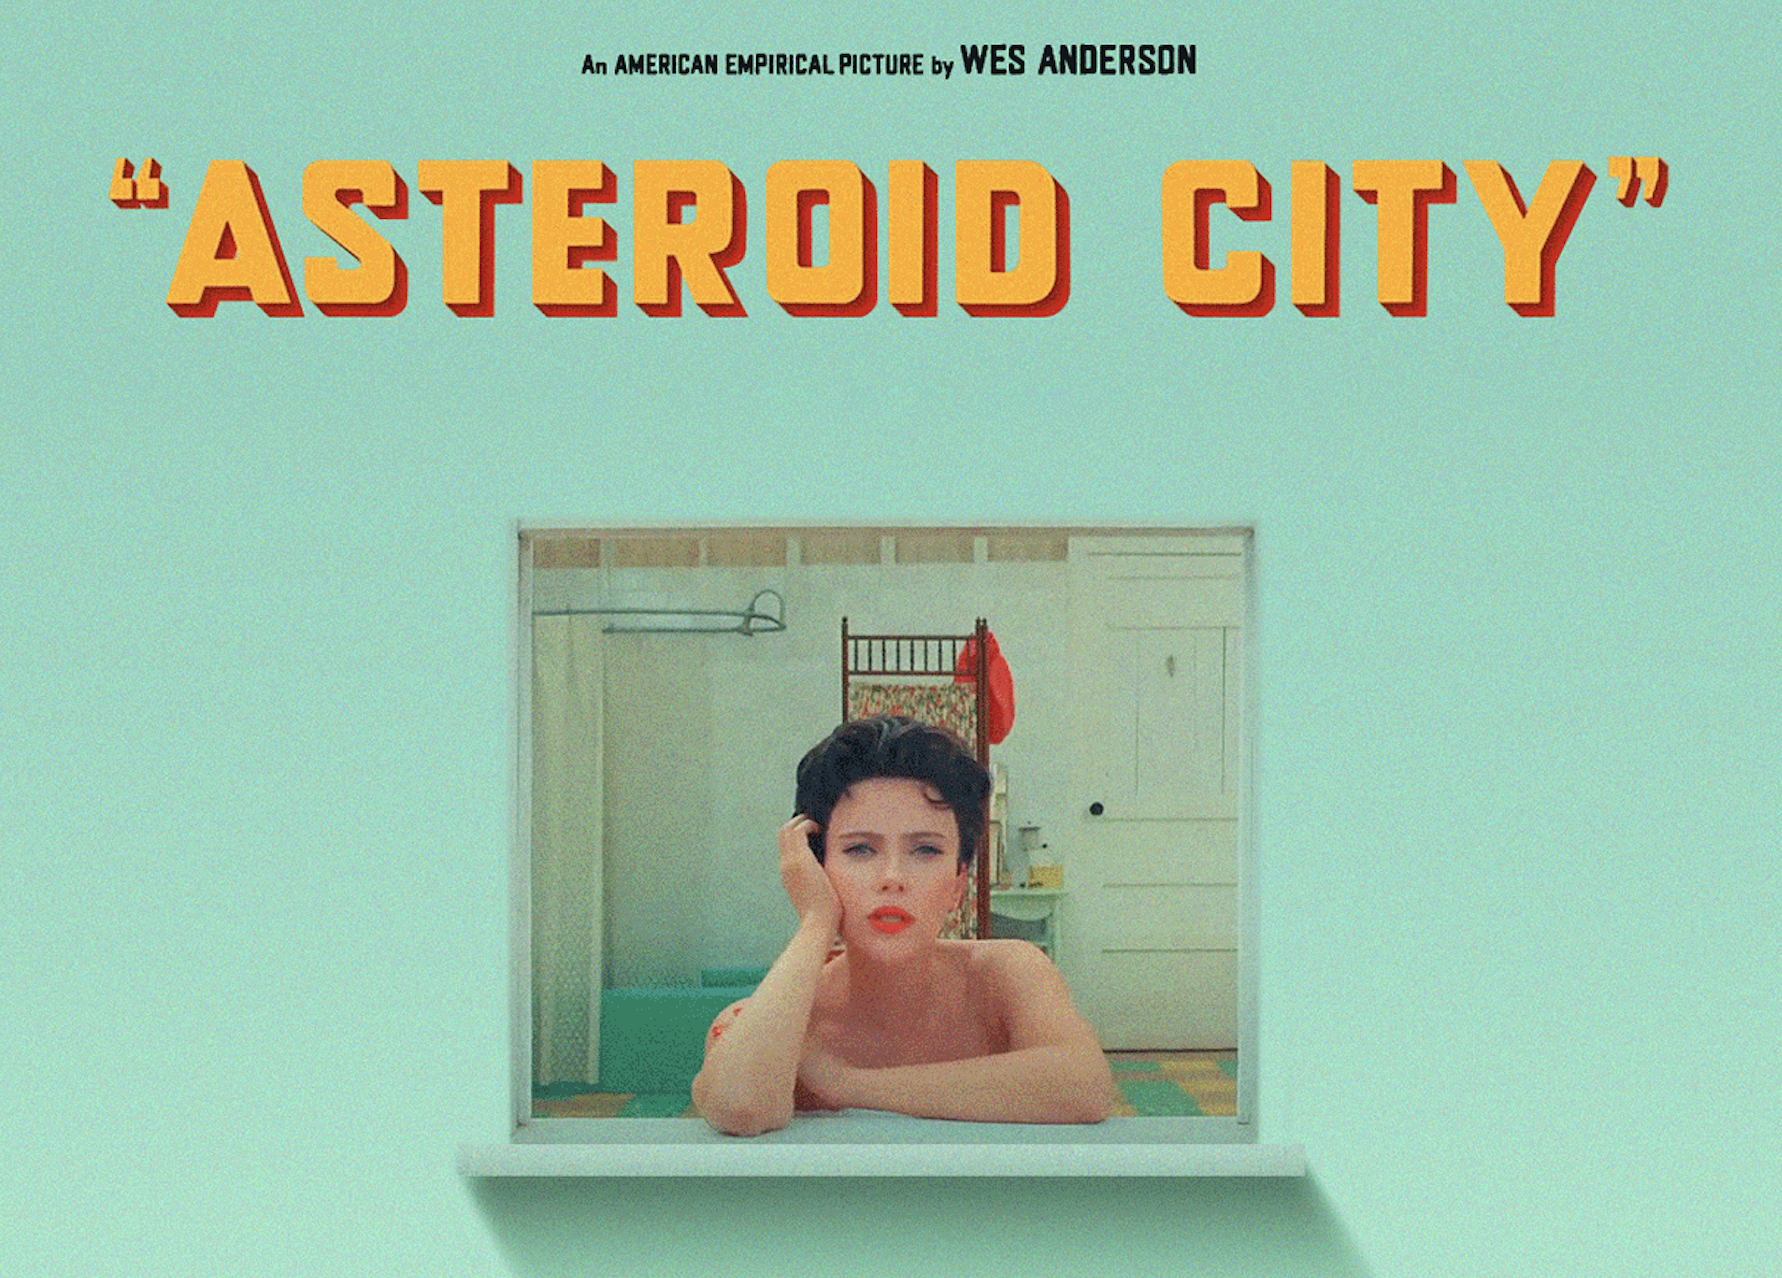 asteroid city Wes anderson